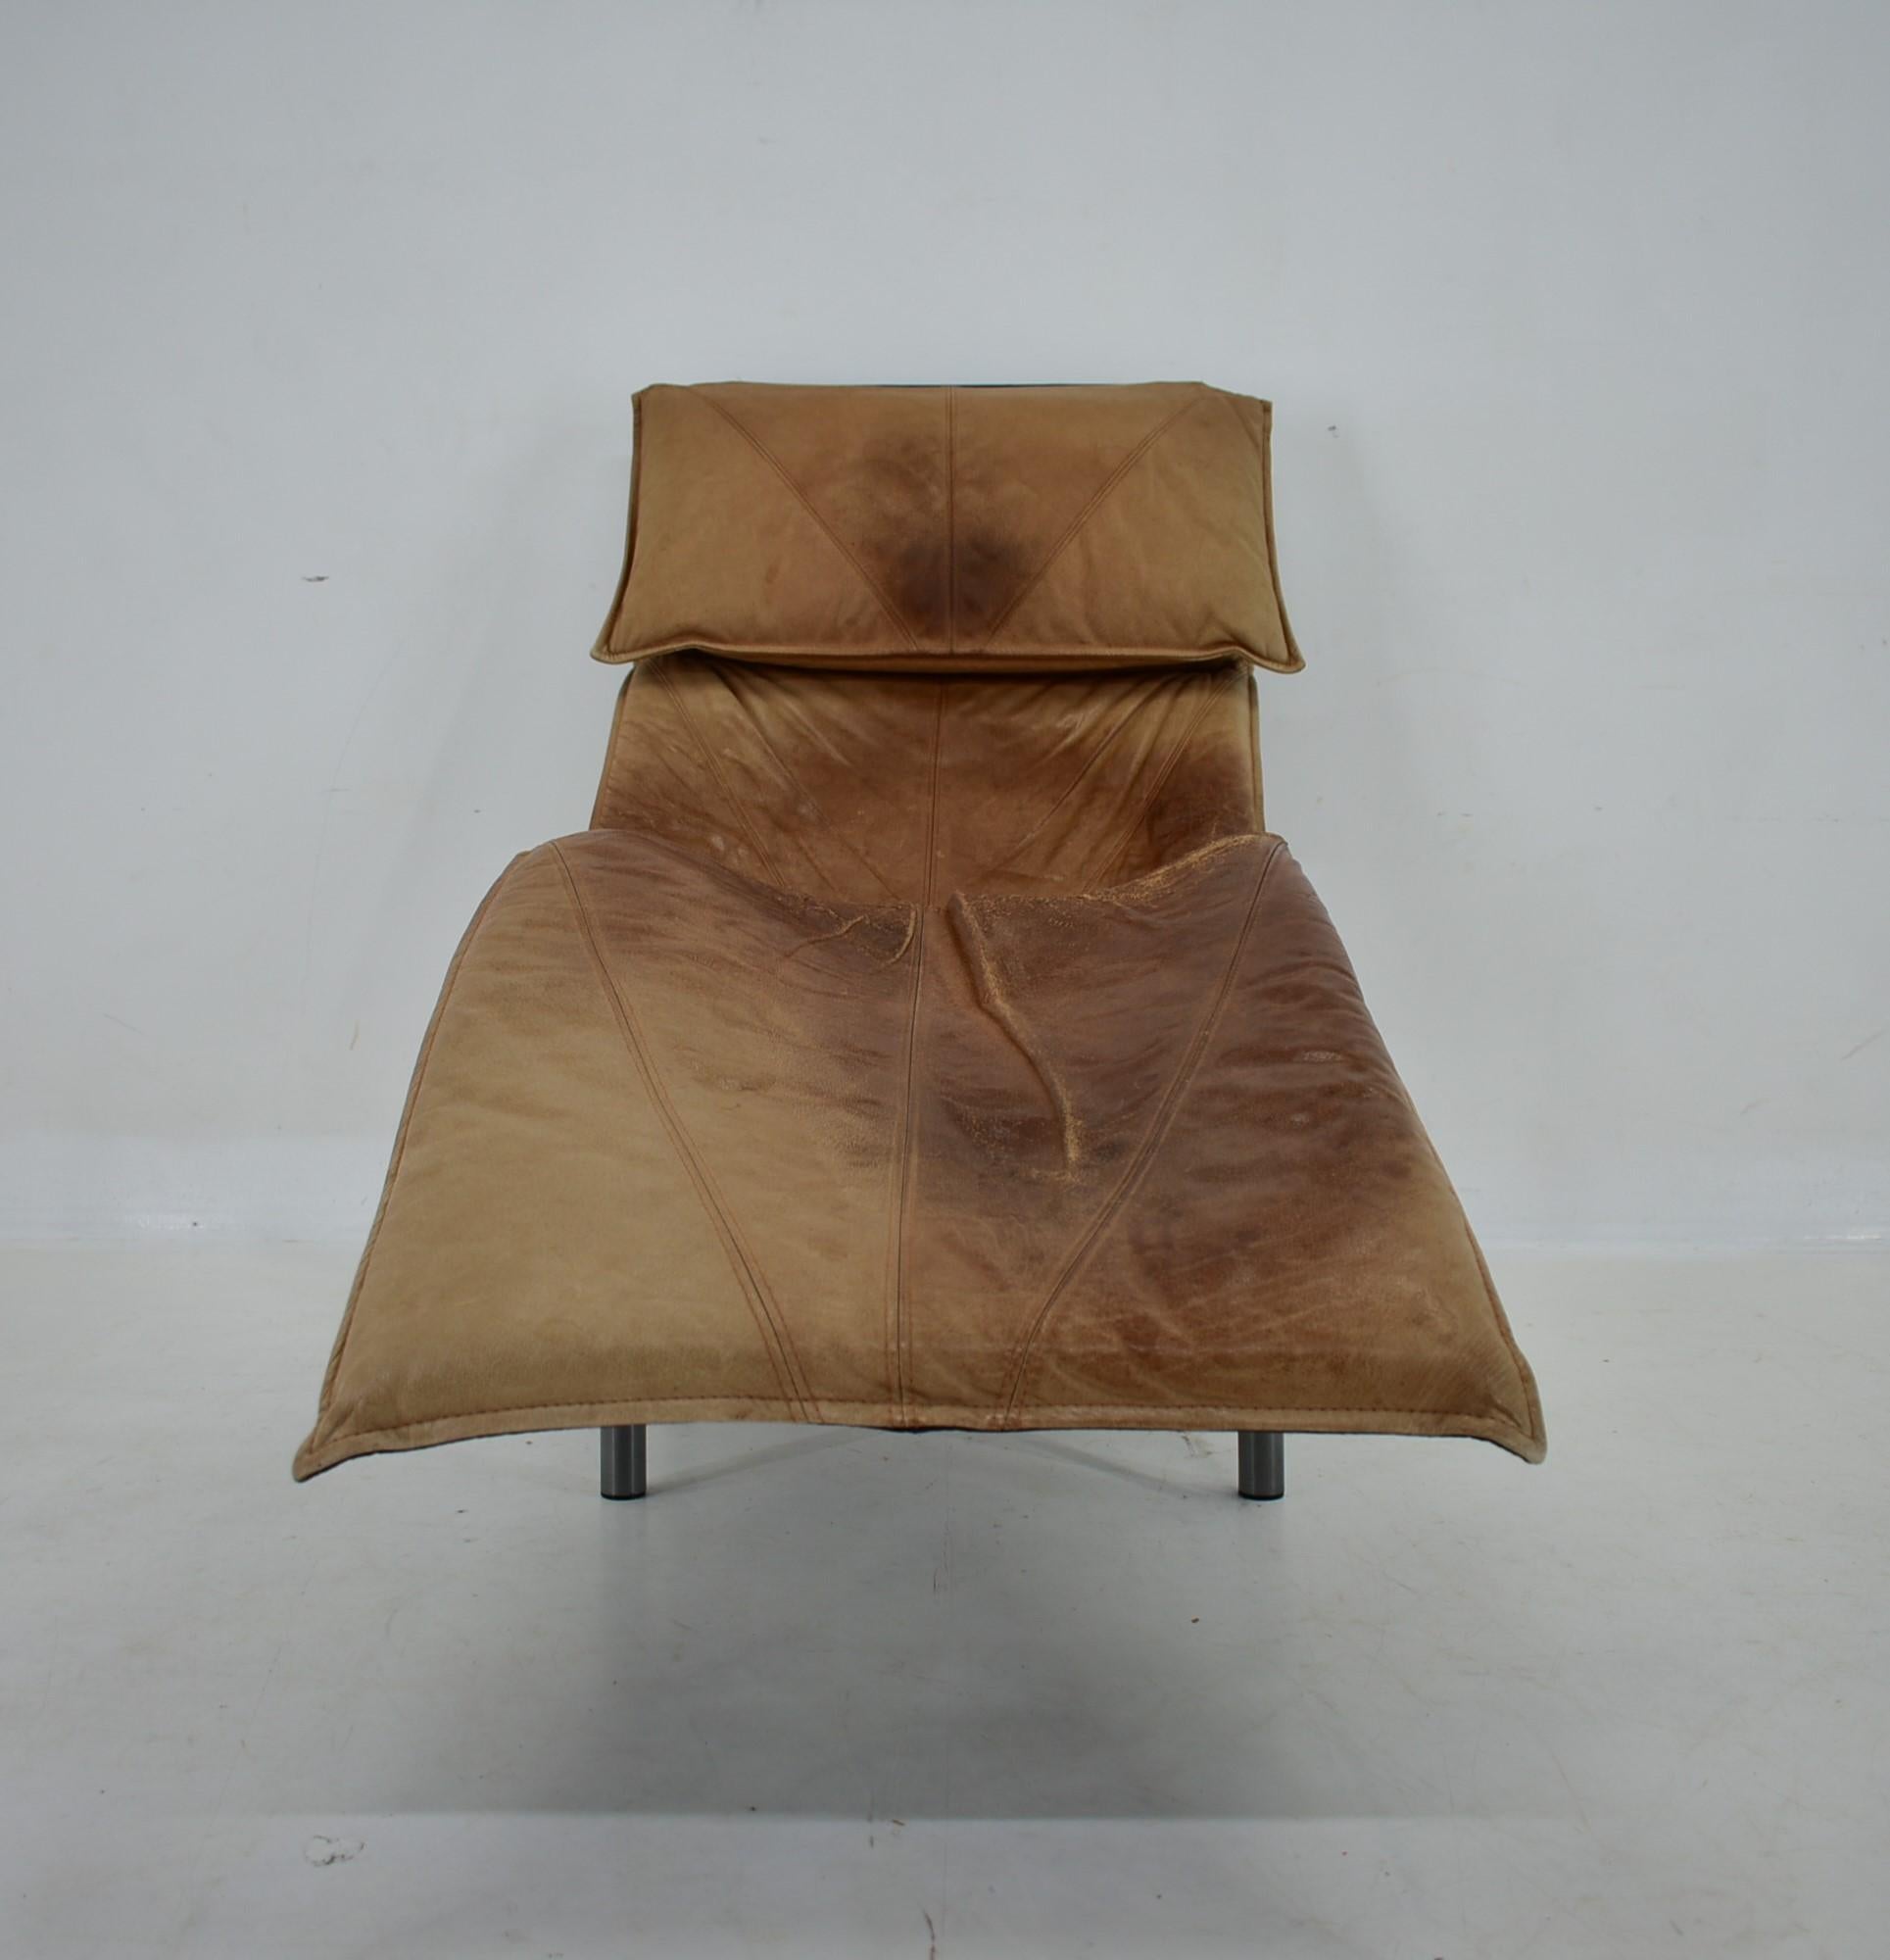 Vintage Cognac Leather Chaise Longue by Tord Bjorklund Sweden, 1970 In Good Condition For Sale In Praha, CZ